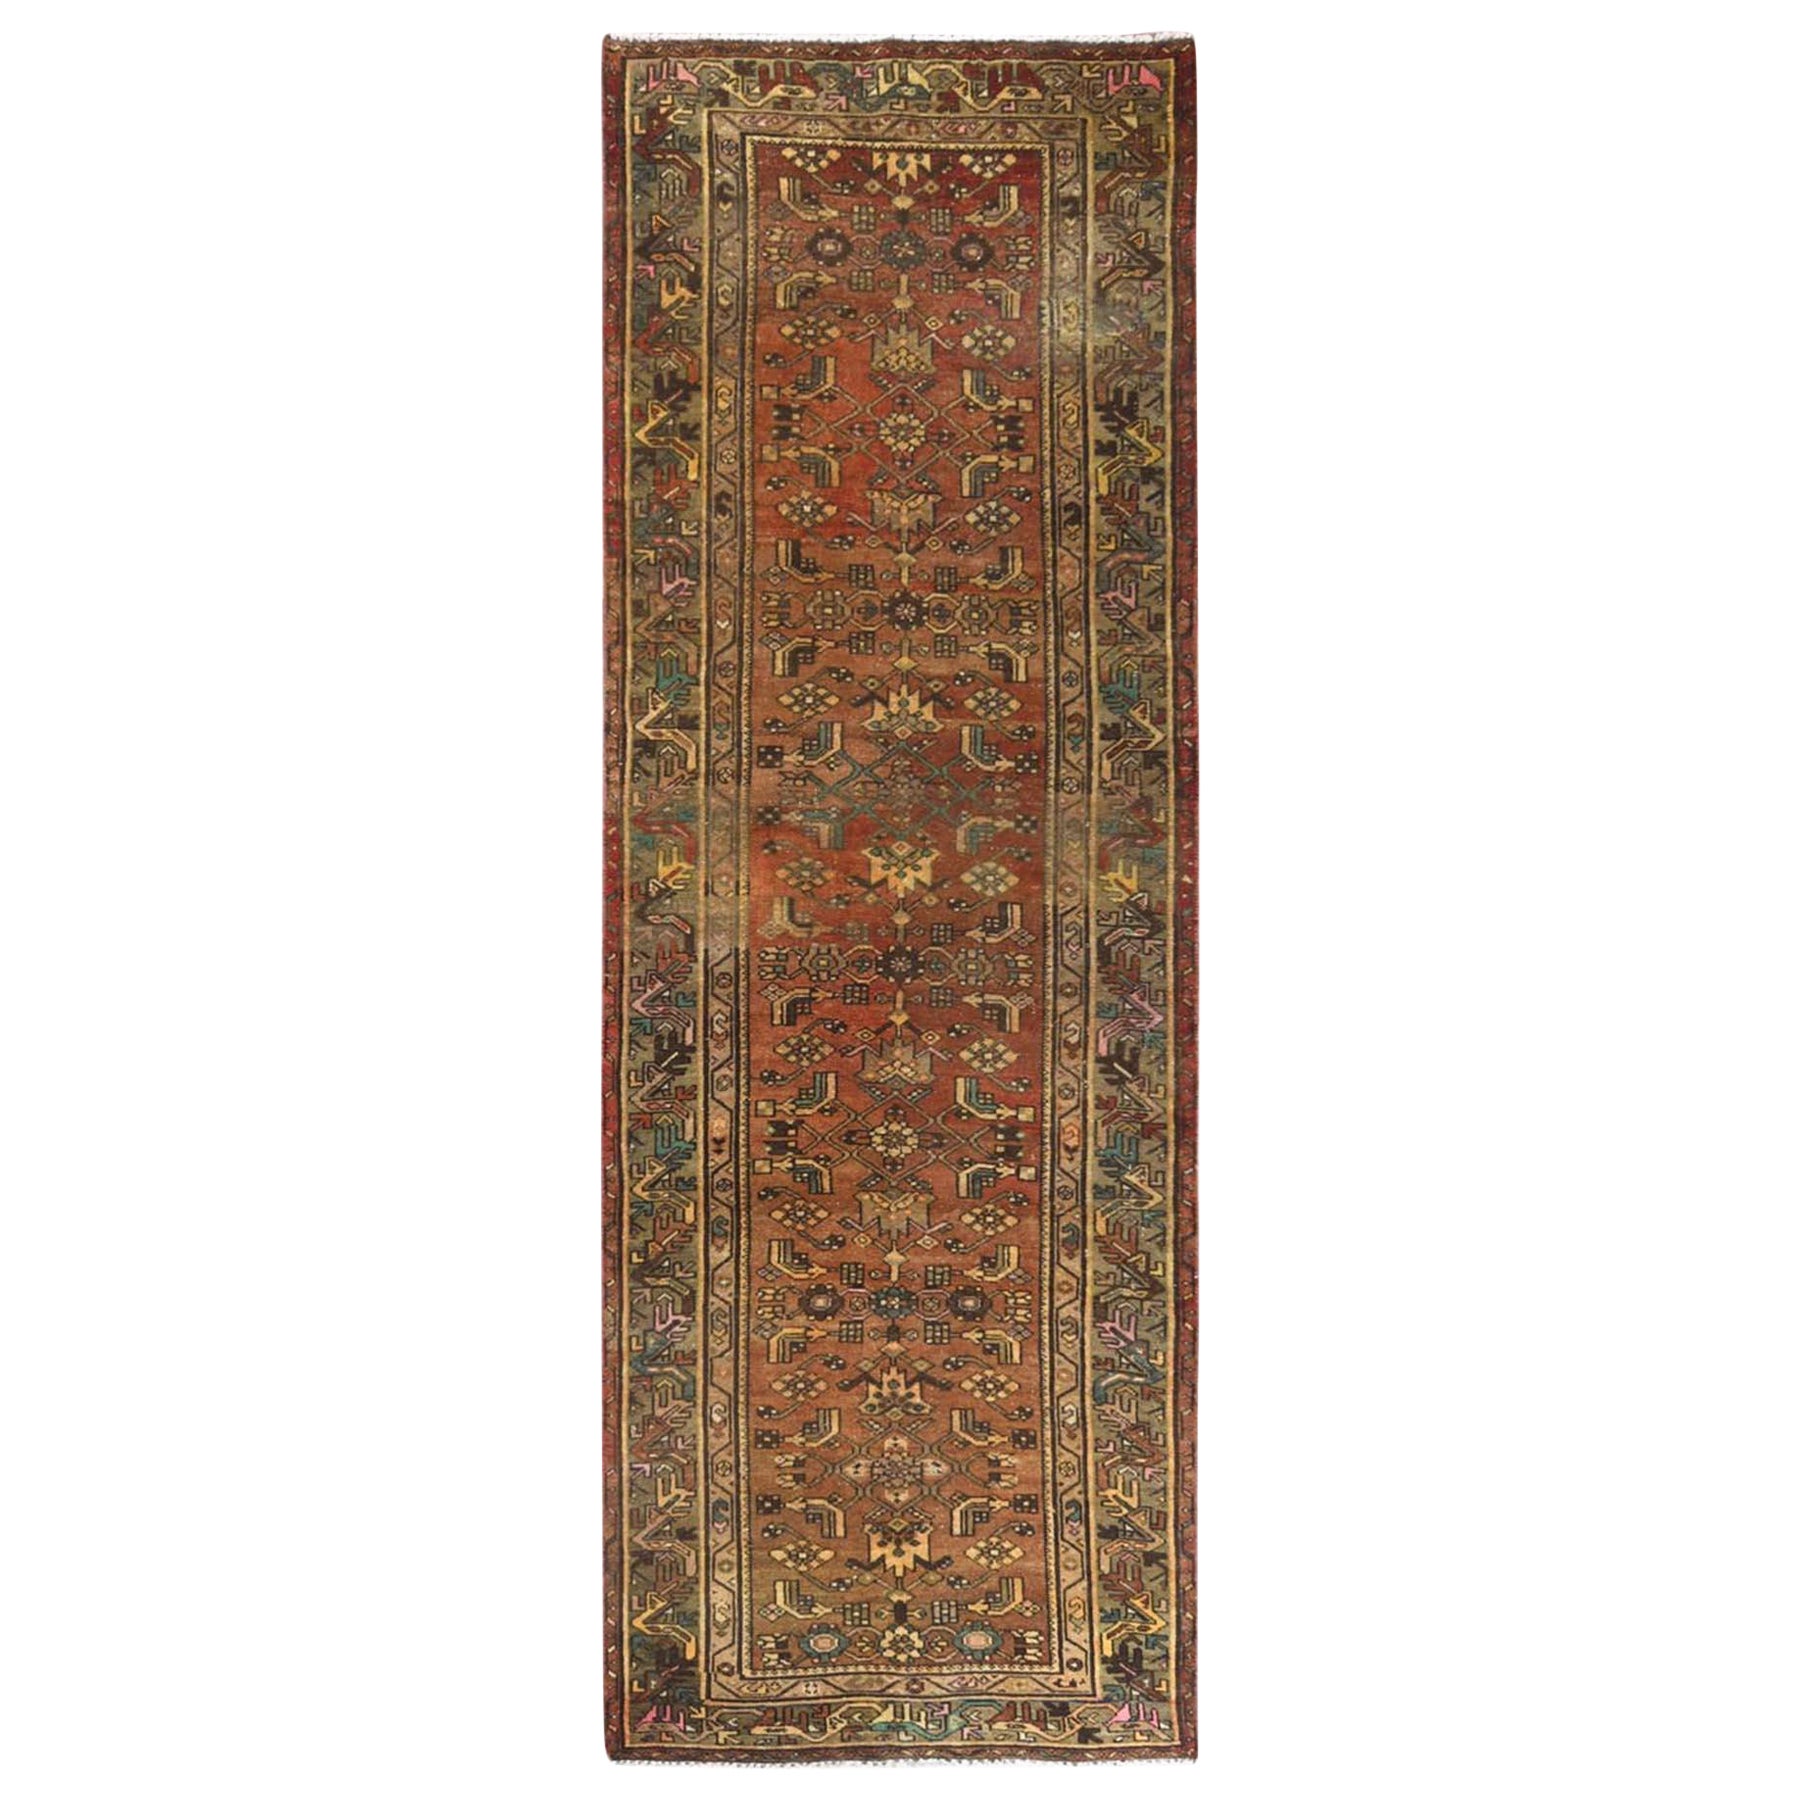 Earth Tone Colors, Vintage Persian Hamadan, Hand Knotted Worn Wool Runner Rug For Sale